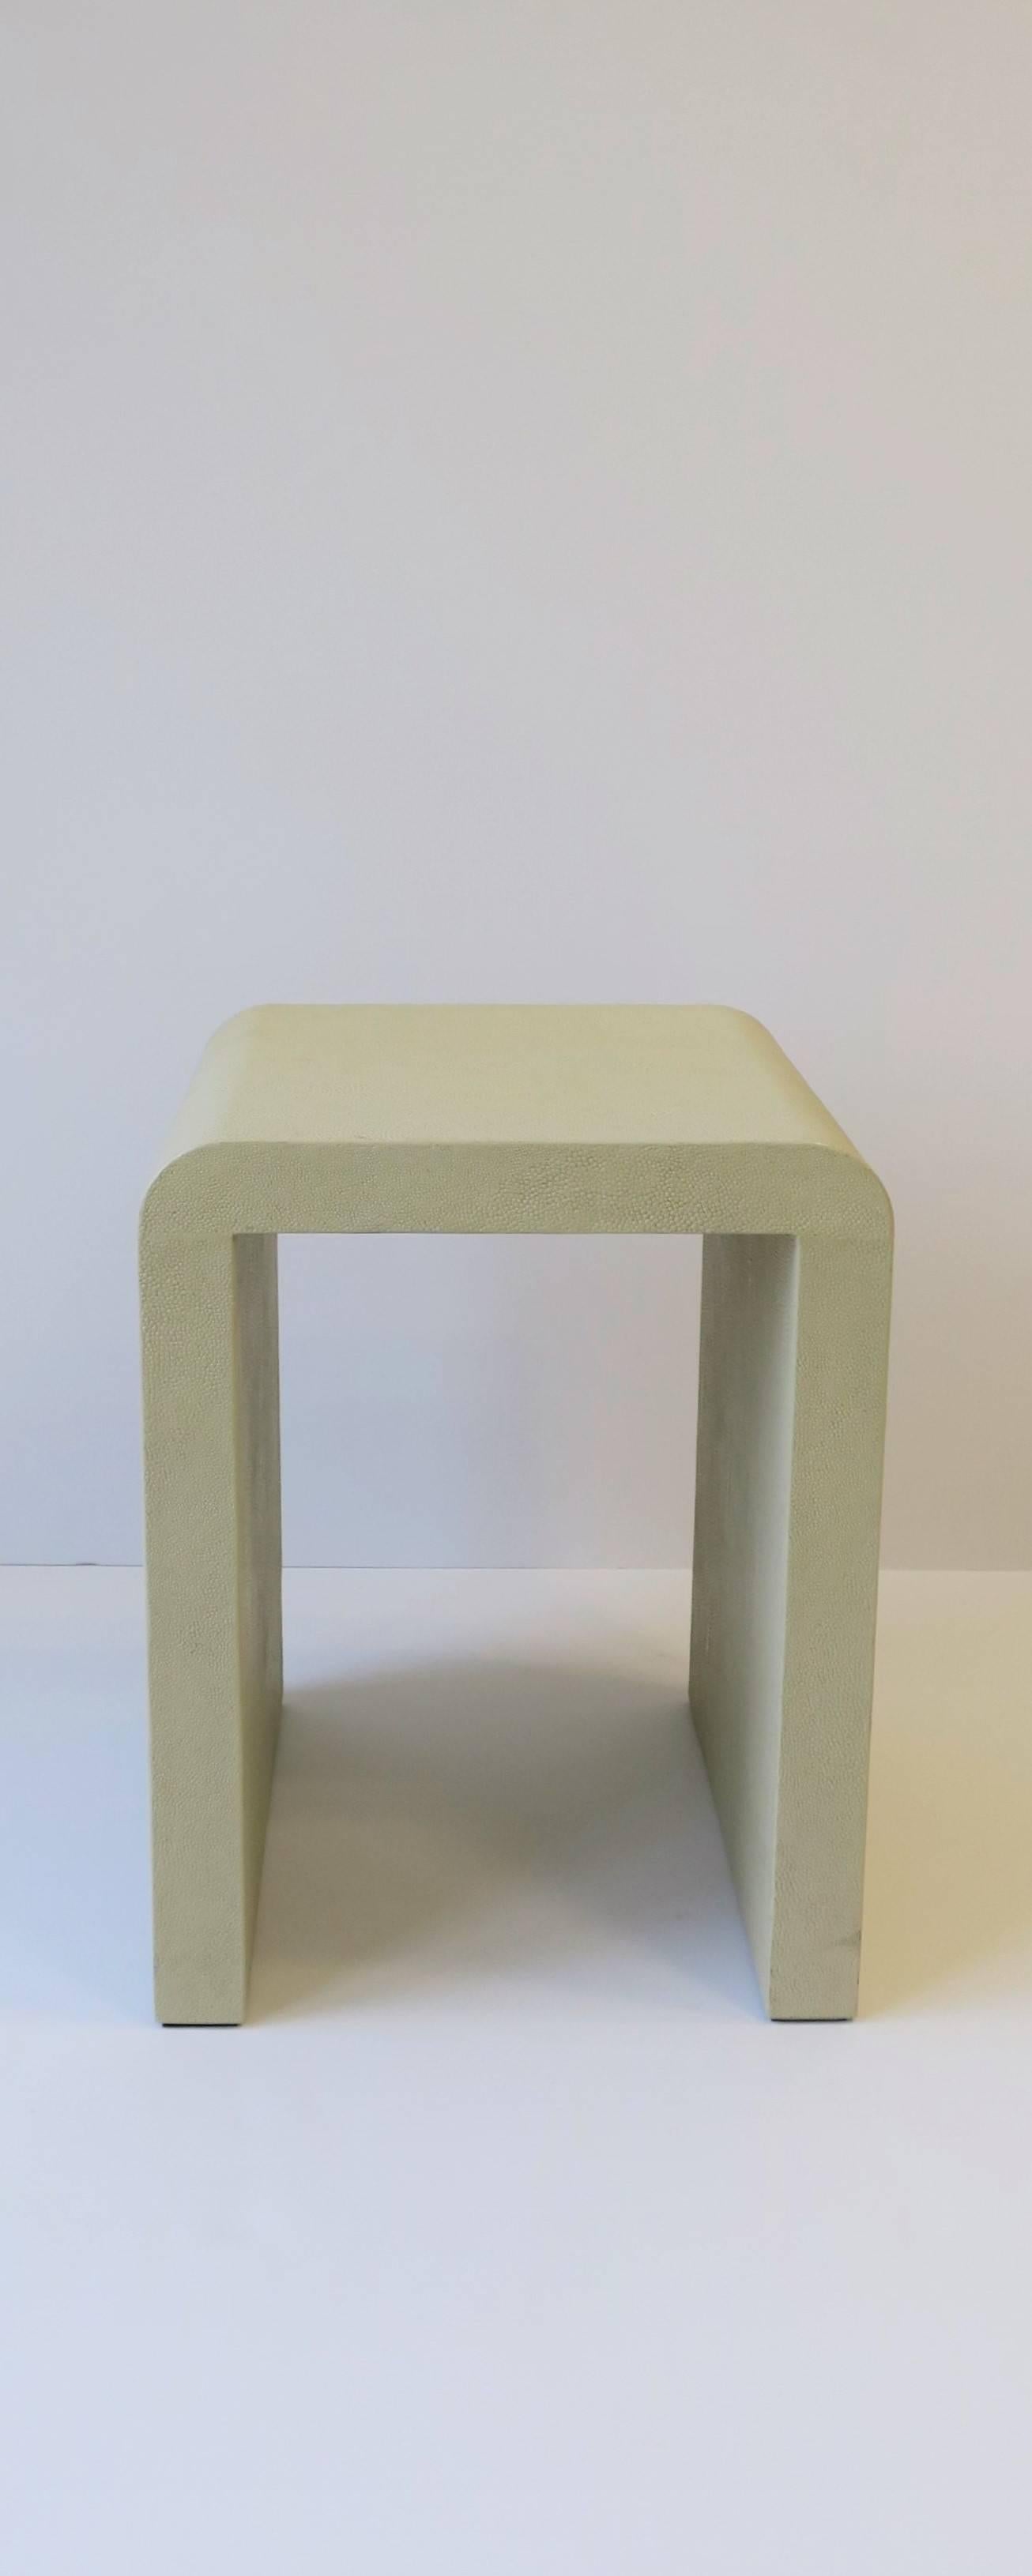 A petite Modern or Post-Modern style shagreen side table or drinks table with a 'waterfall' edge design in a neutral hue. 

Table measures: 12.75